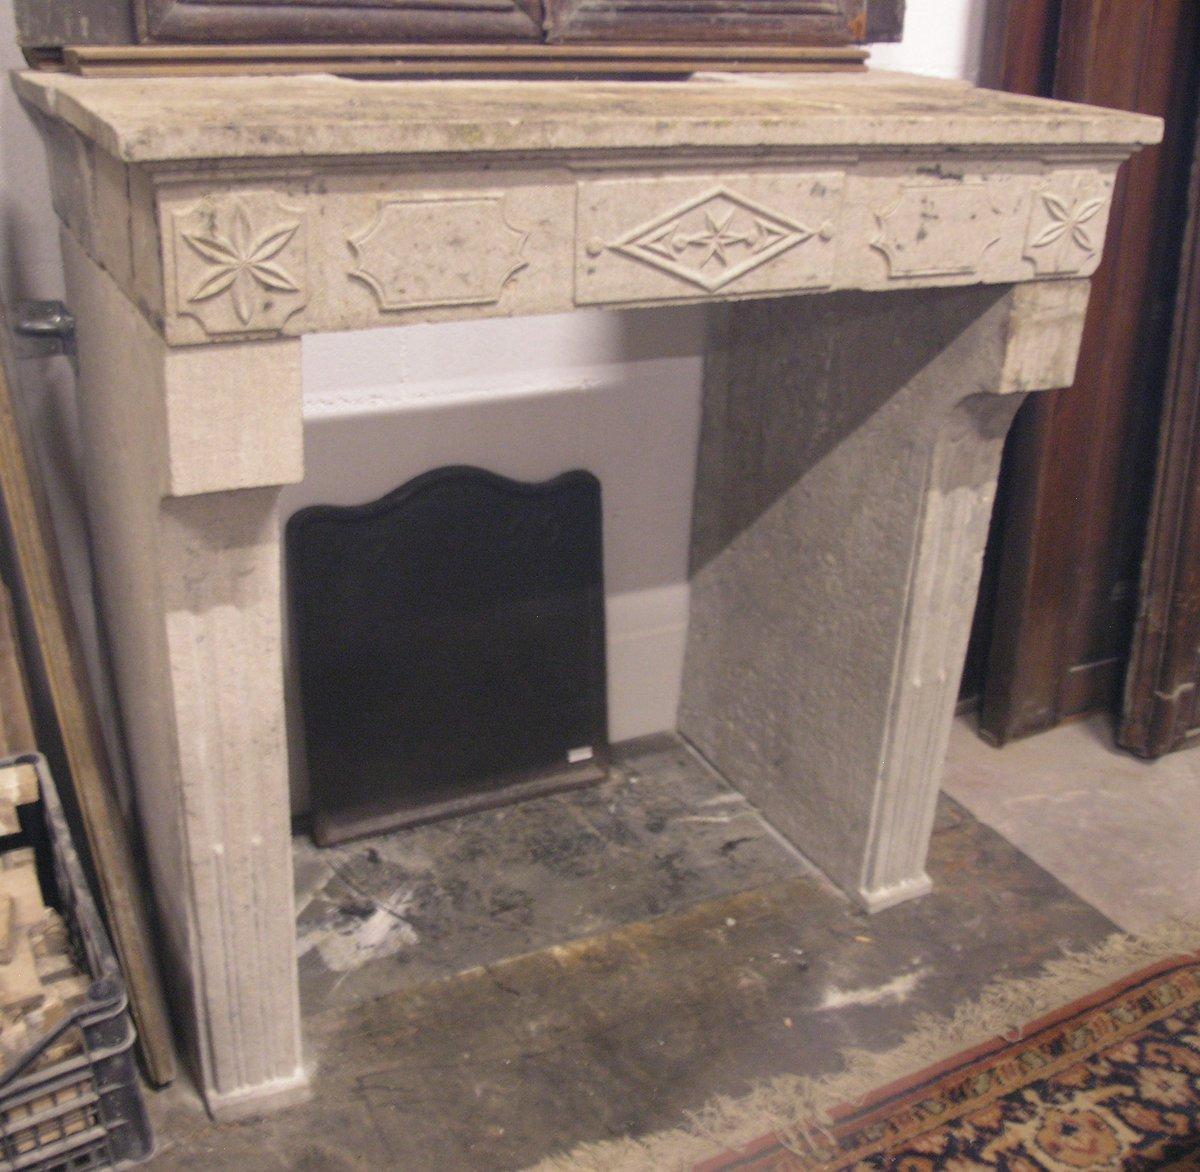 Antique fireplace mantel, In refined gray stone, in excellent conservative condition, the star-shaped decorations on the pediment are very beautiful above the hole for the chimney, intact and original.
'700 France.